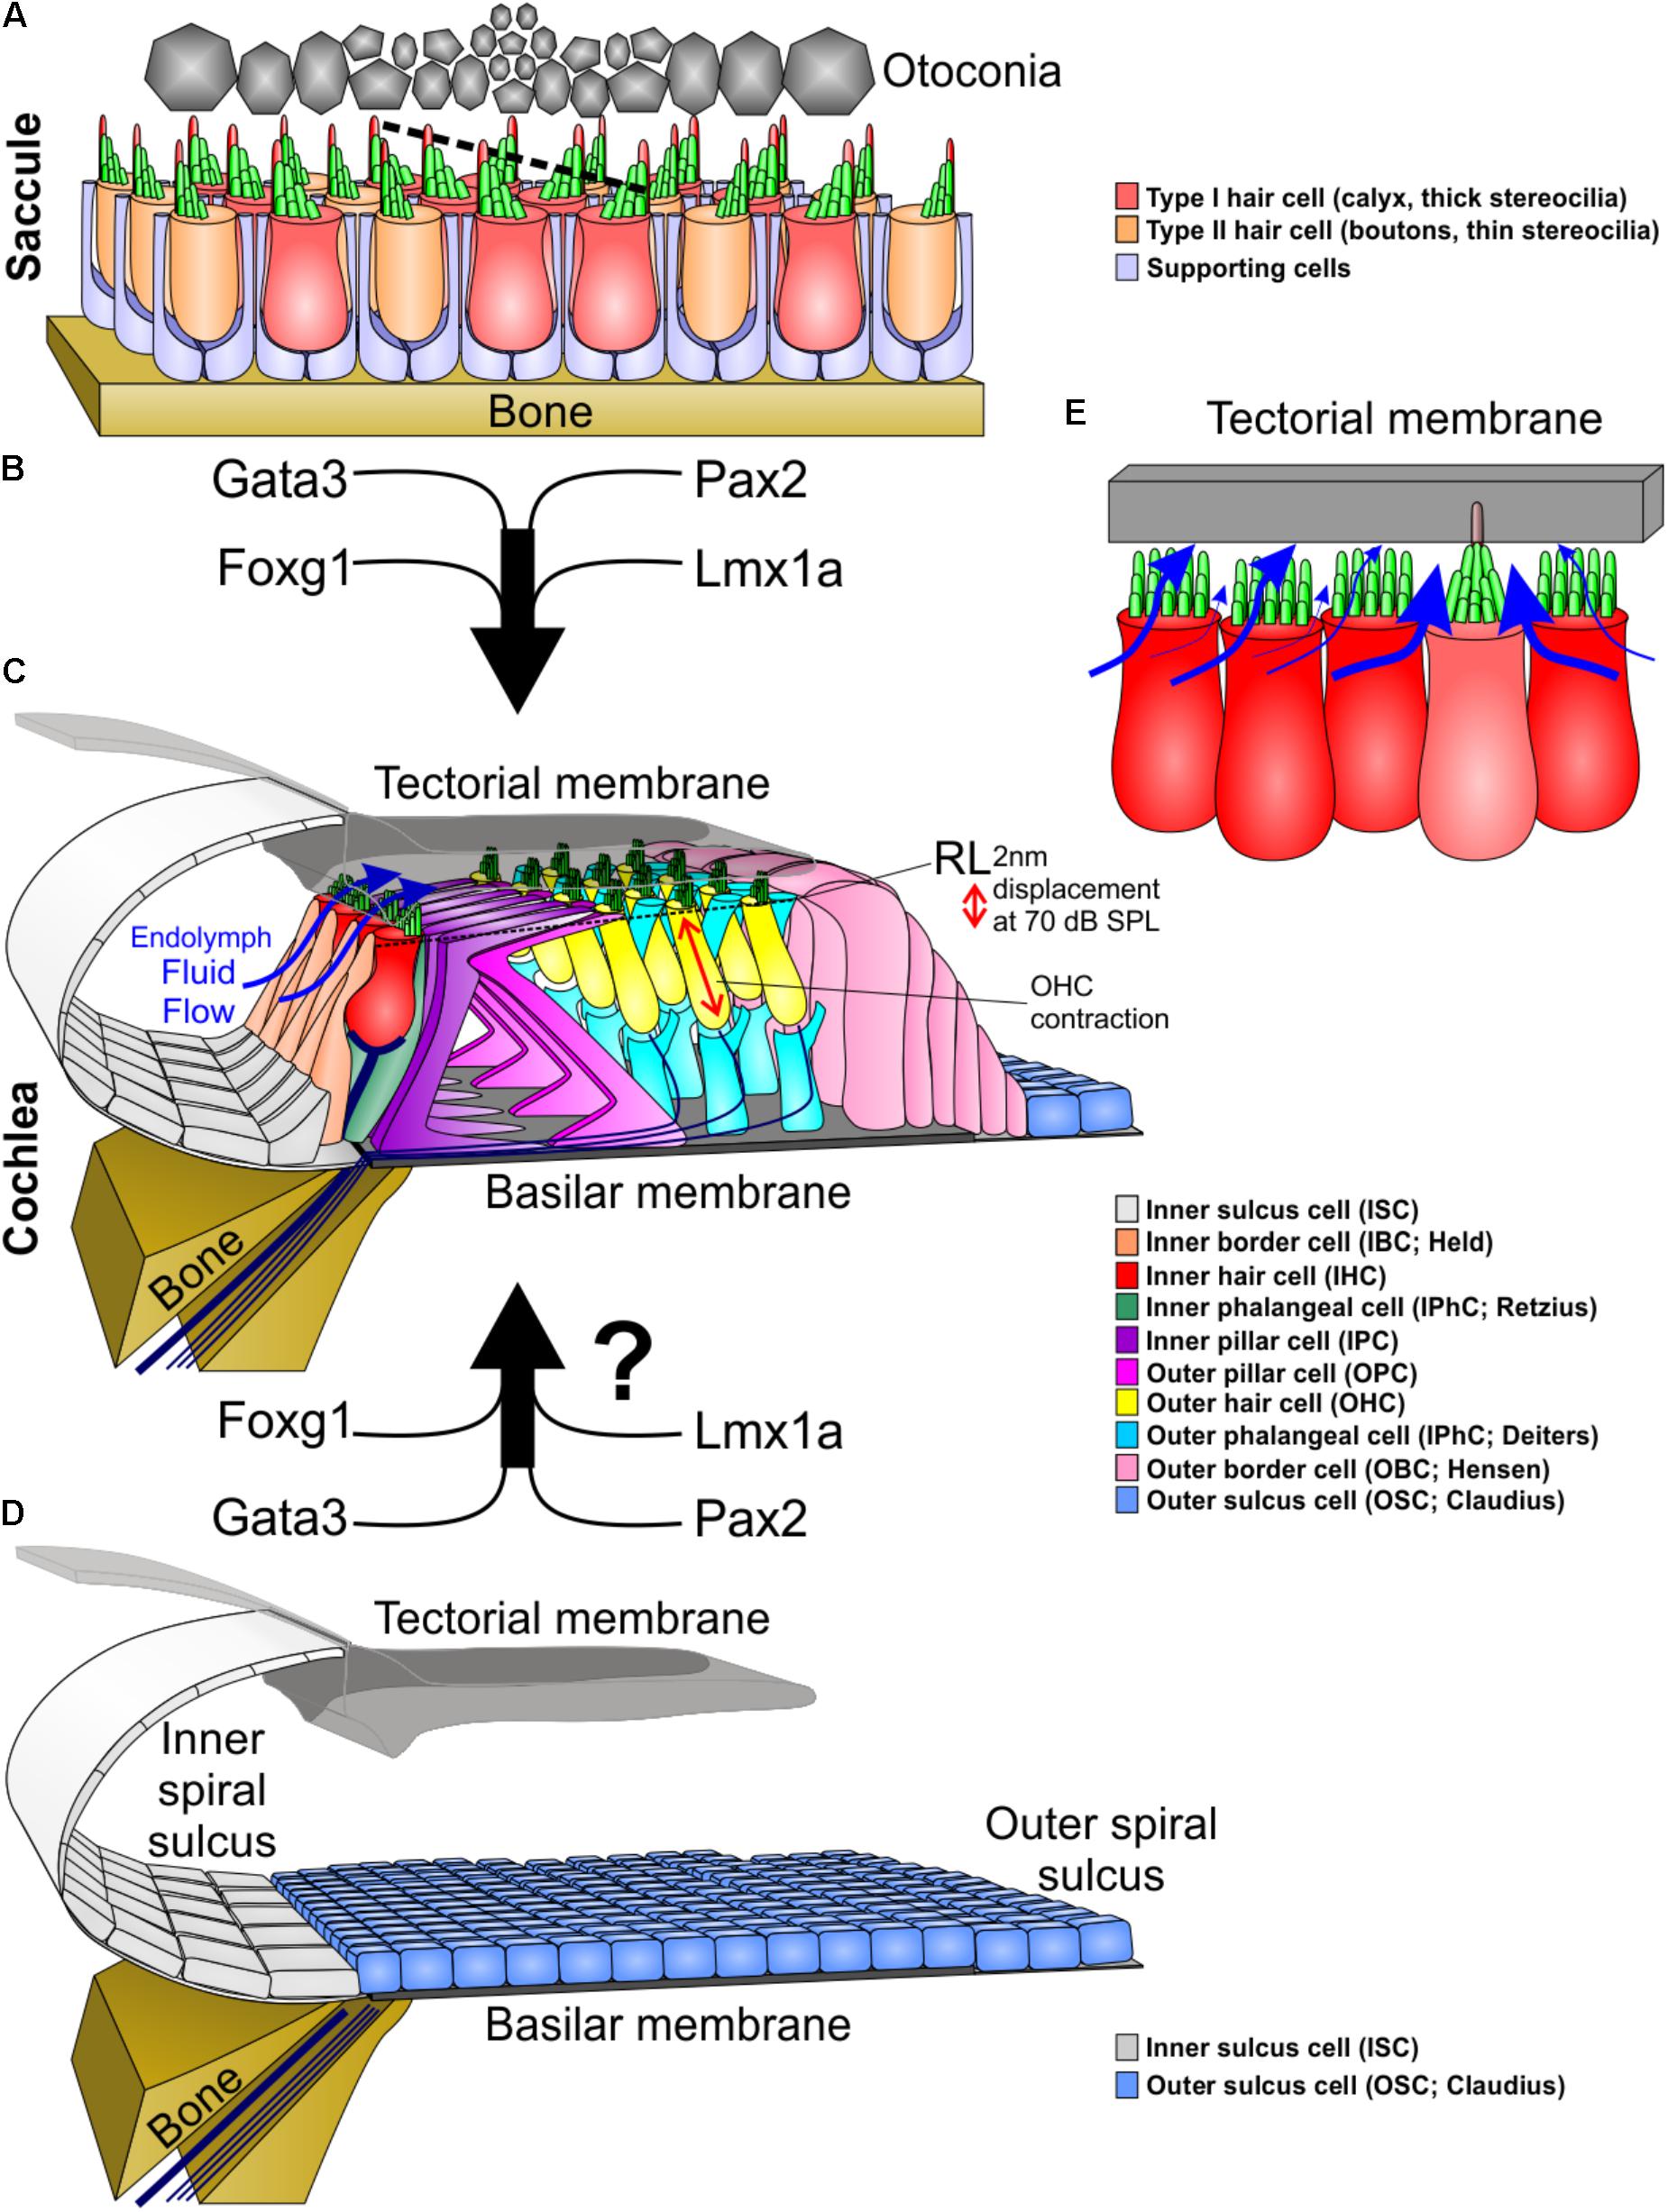 Frontiers | Evolutionary and Developmental Biology Provide Insights Into  the Regeneration of Organ of Corti Hair Cells